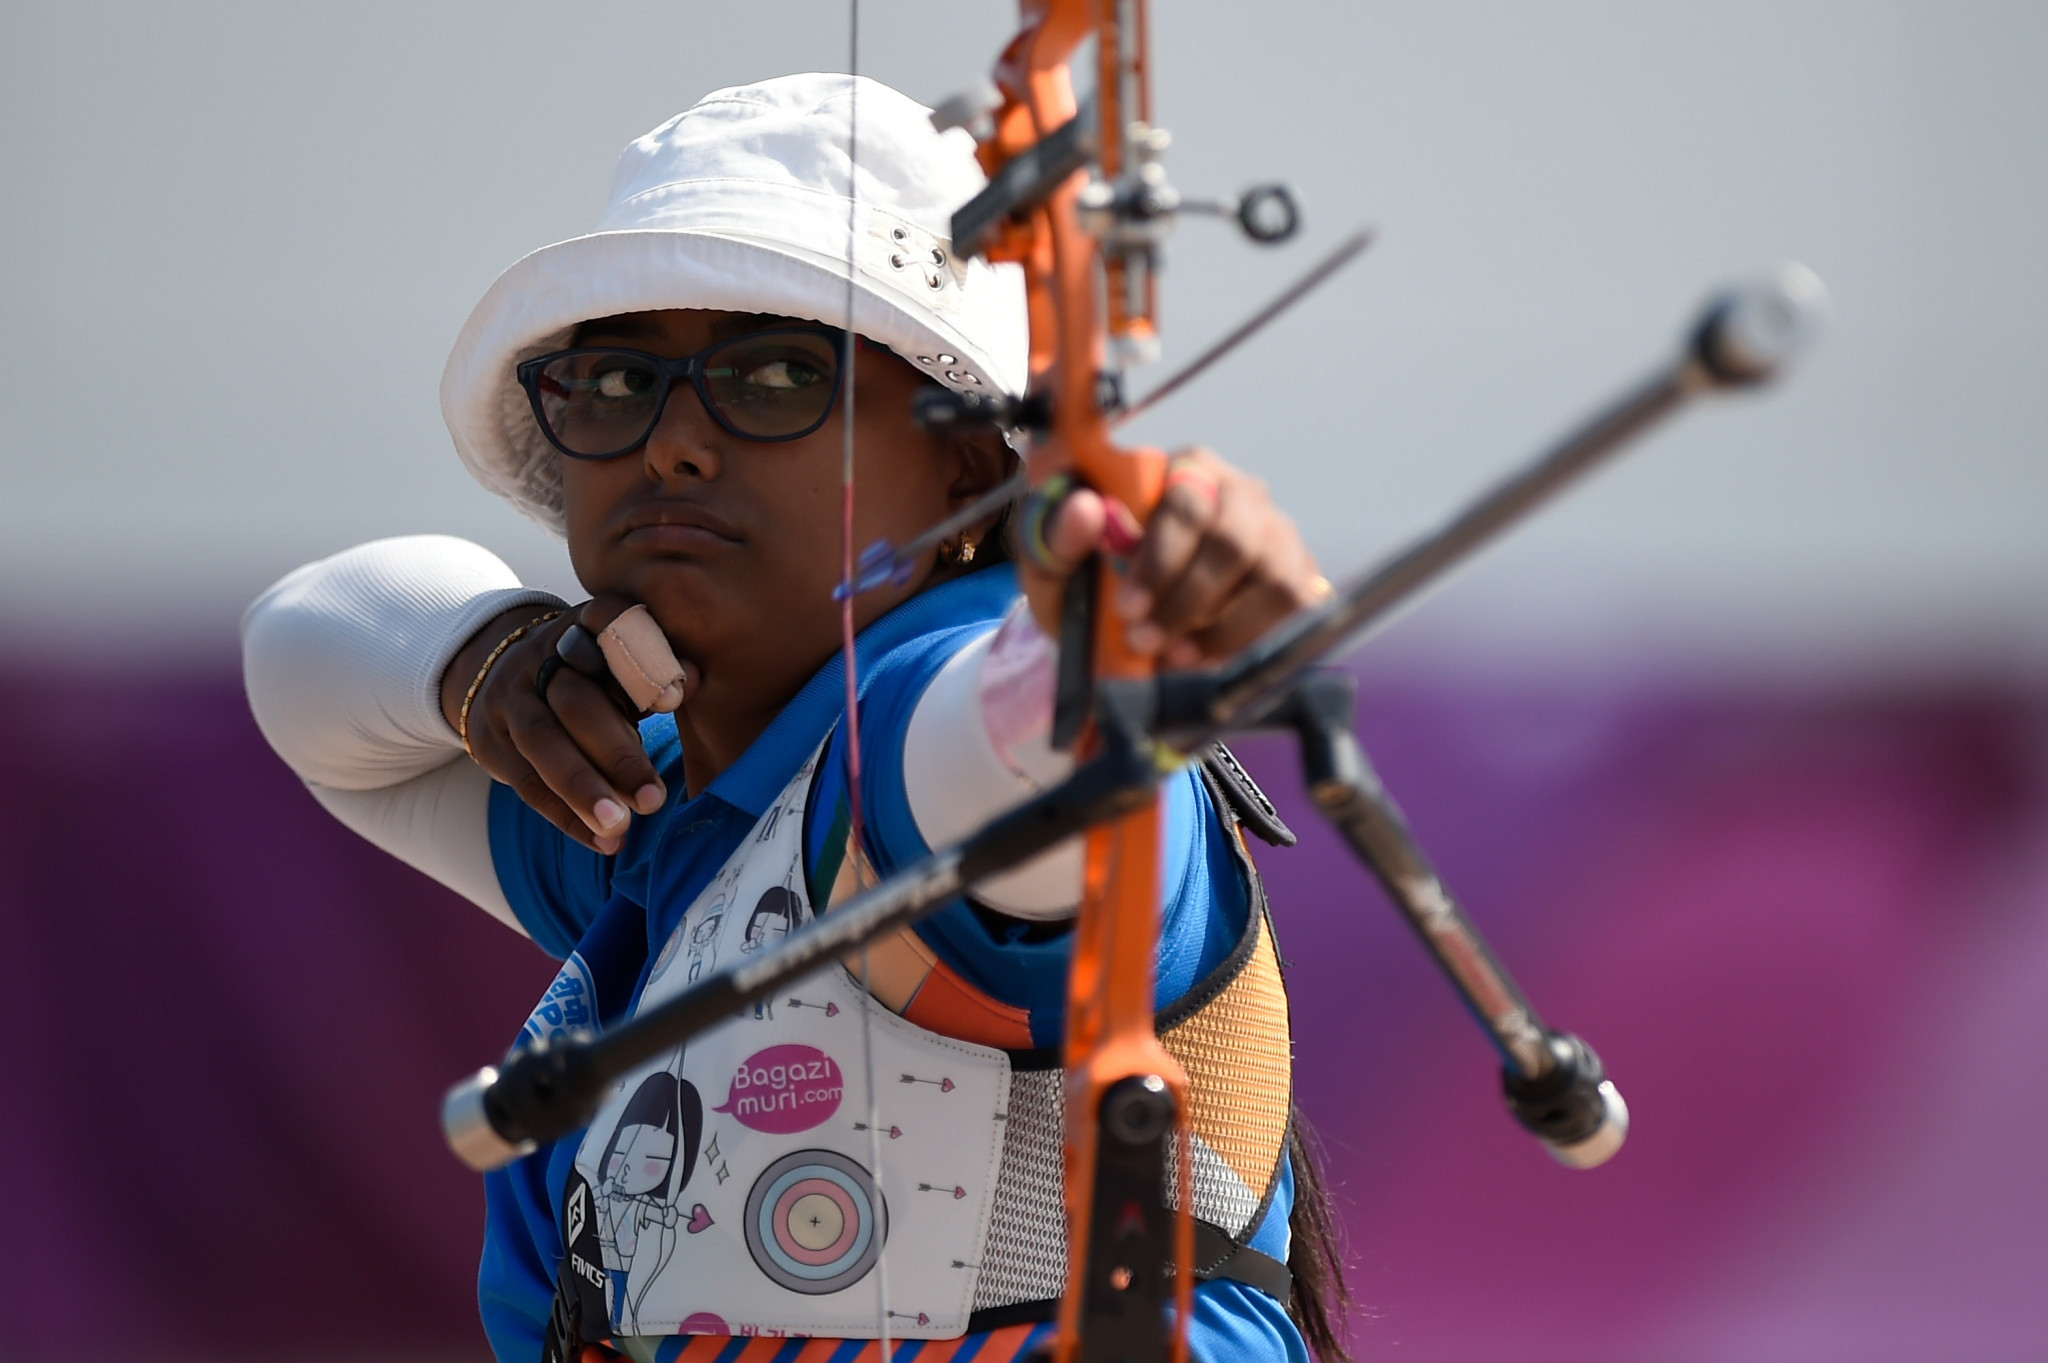 Indian archers competed at the Tokyo 2020 test event and the Archery World Cup in Berlin ©Getty Images